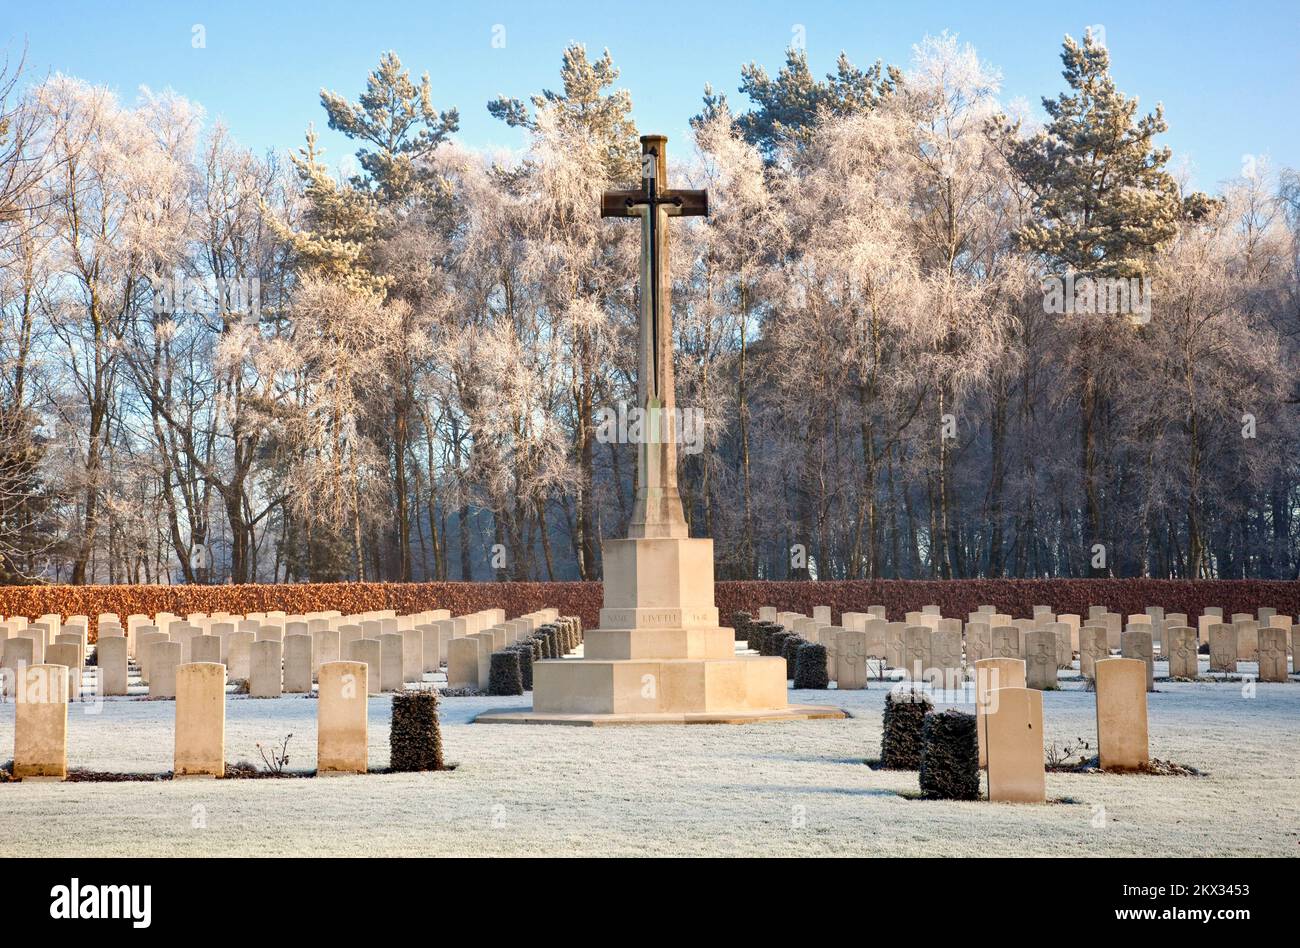 Commonwealth War Cemetery Cannock Chase Country Park AONB (area of outstanding natural beauty) in Staffordshire England UK January Stock Photo